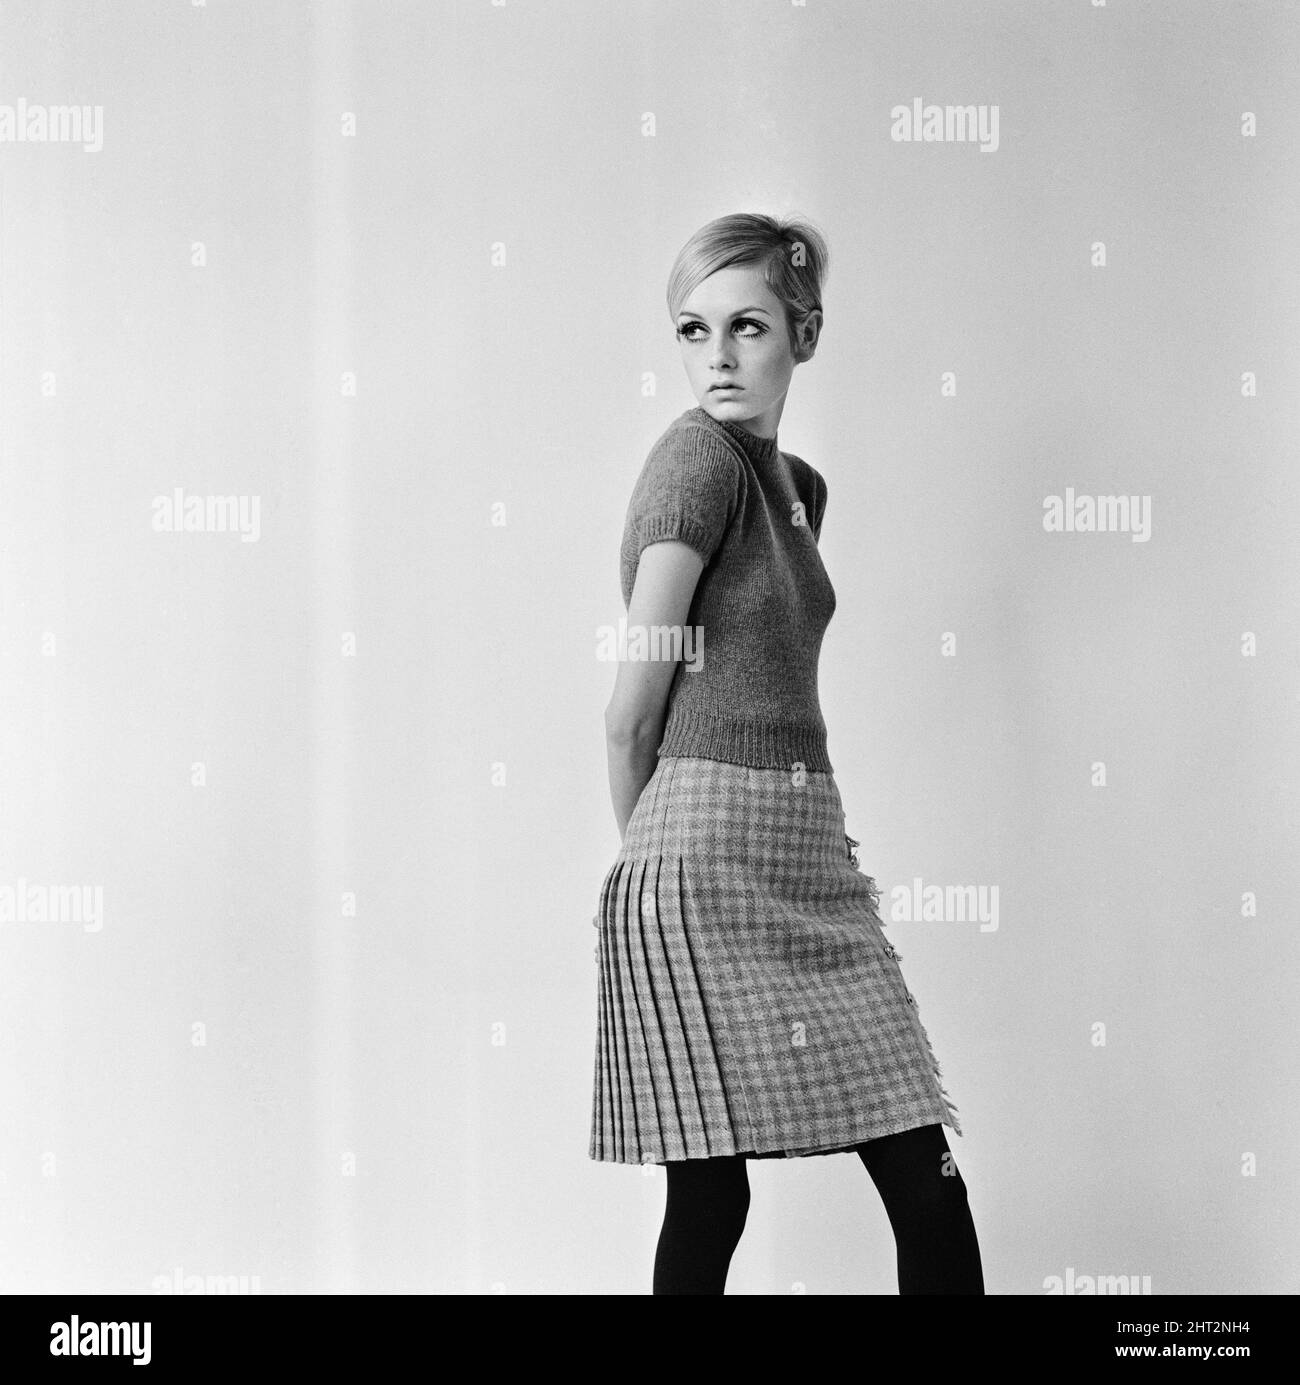 Cardigan sweater Black and White Stock Photos & Images - Page 3 - Alamy